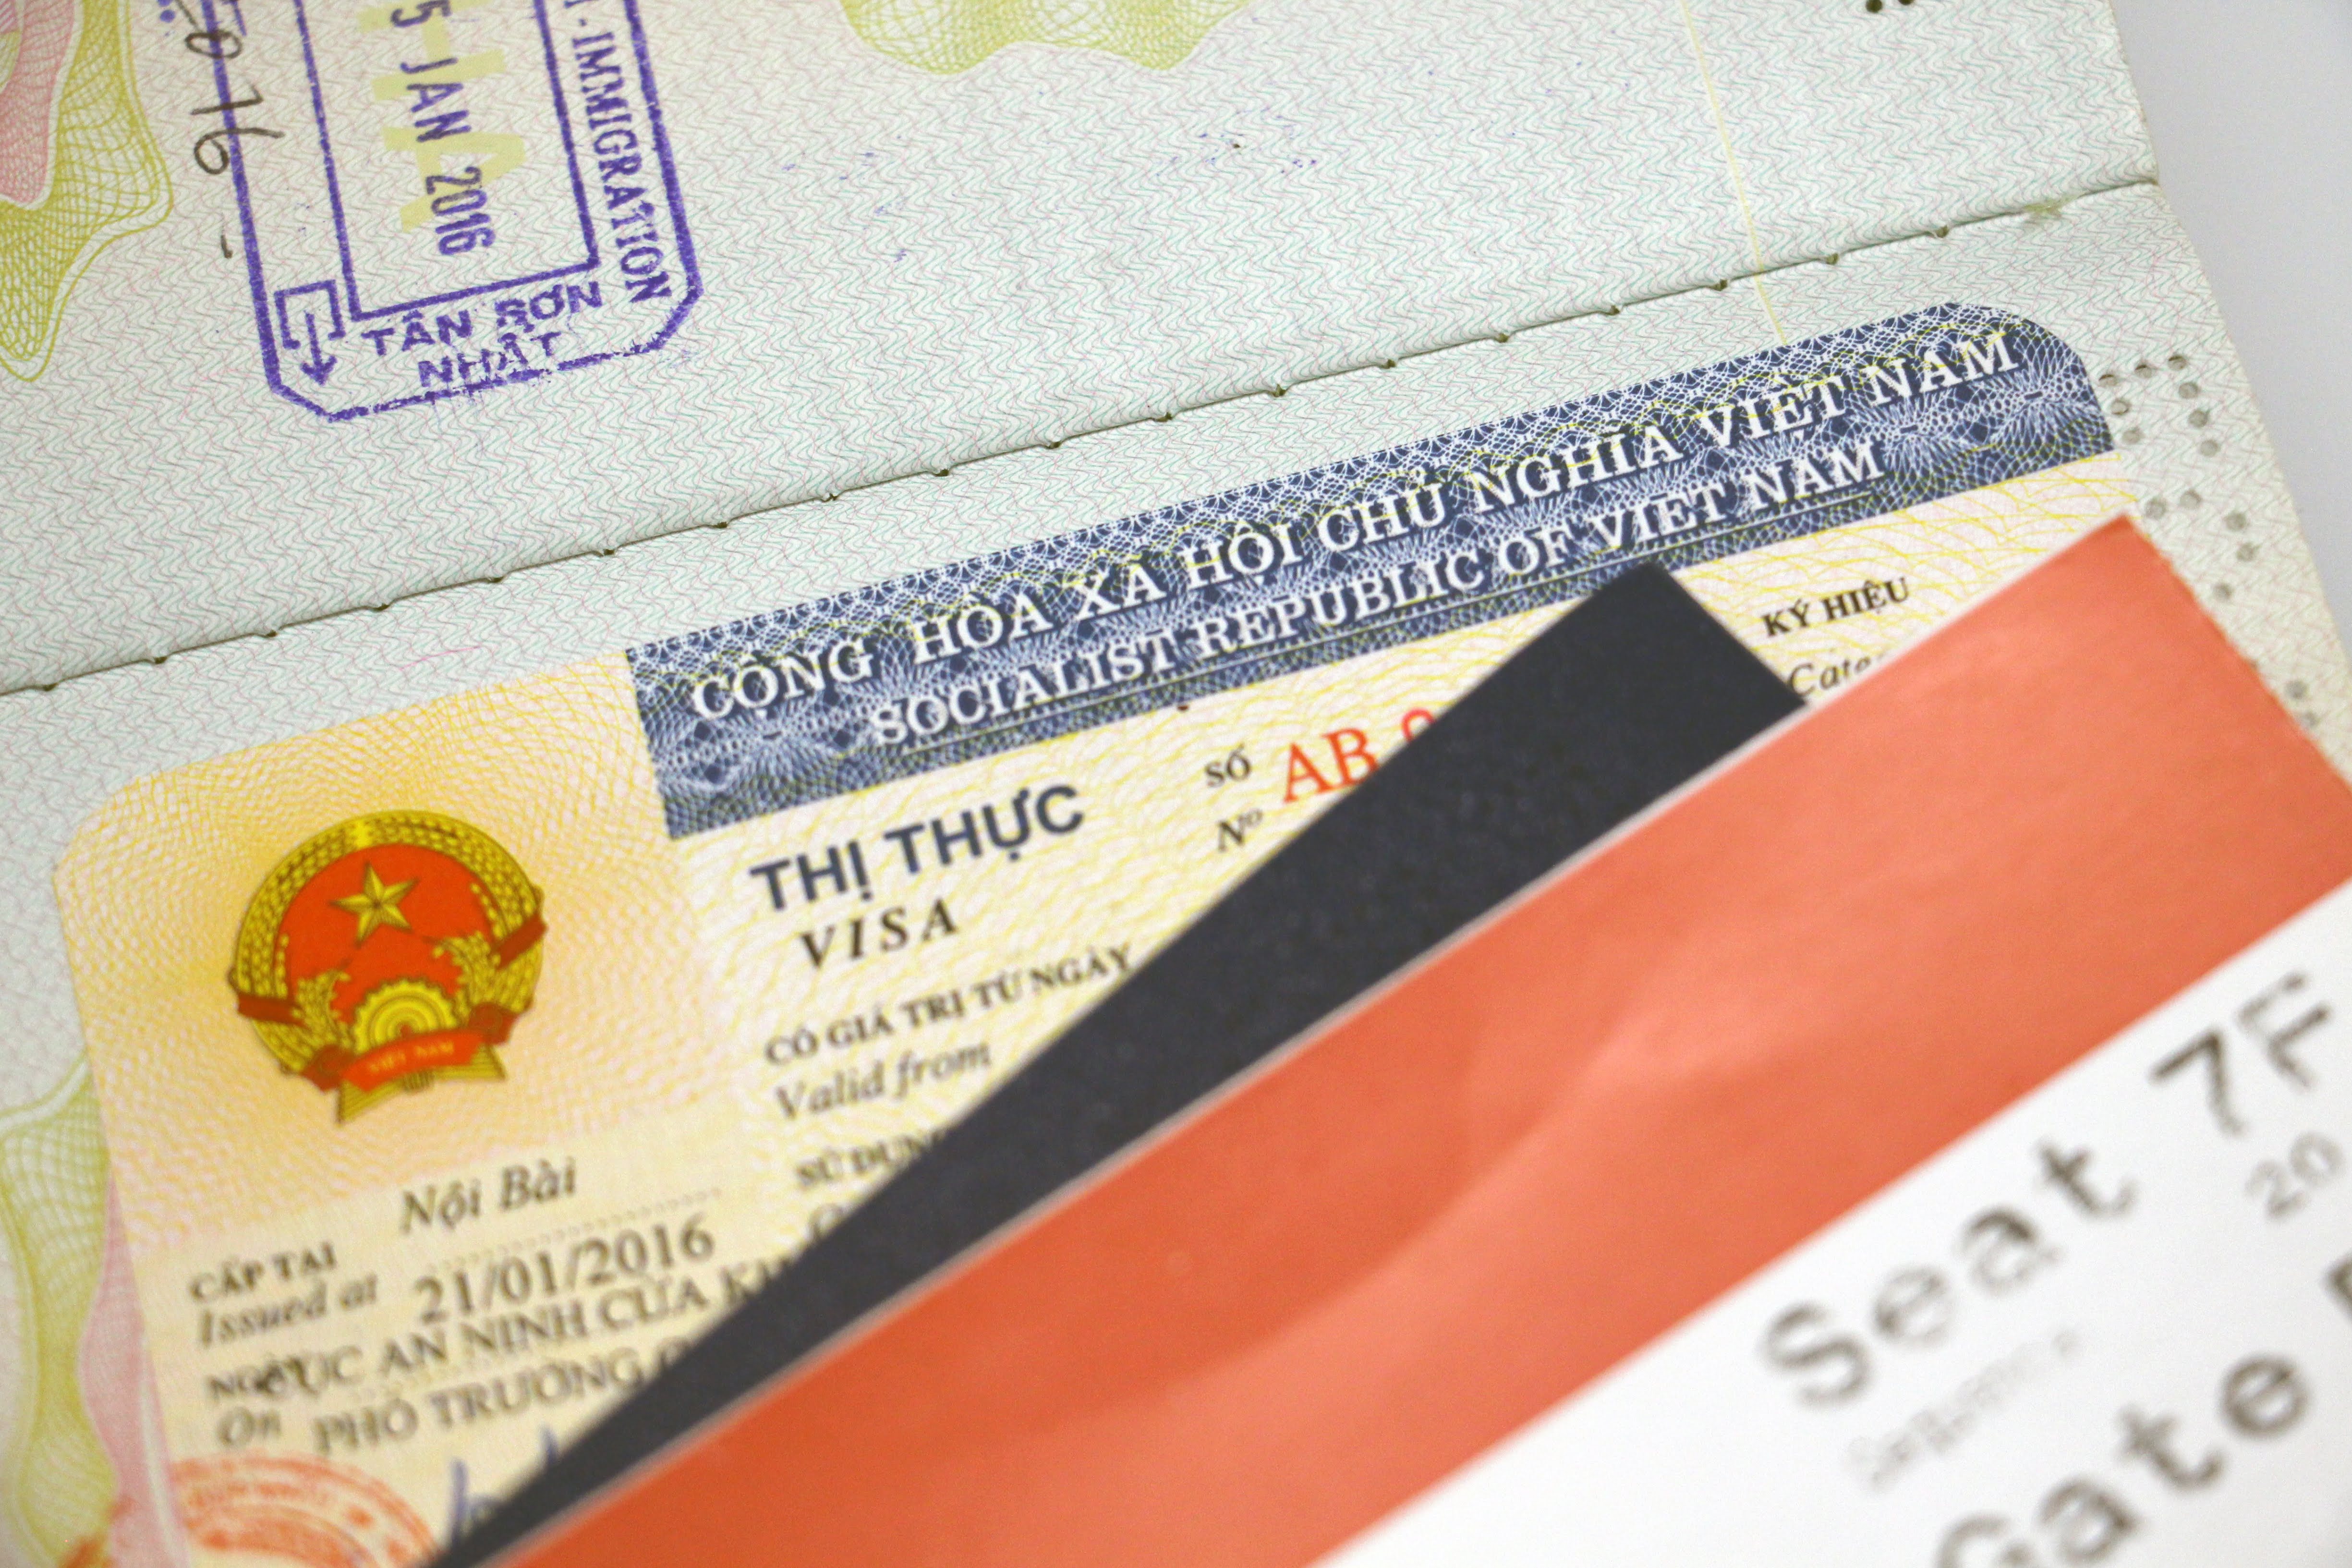 I Fly To Vietnam Today But I Just Realize That I Need A Visa To Enter. How Can I Do?